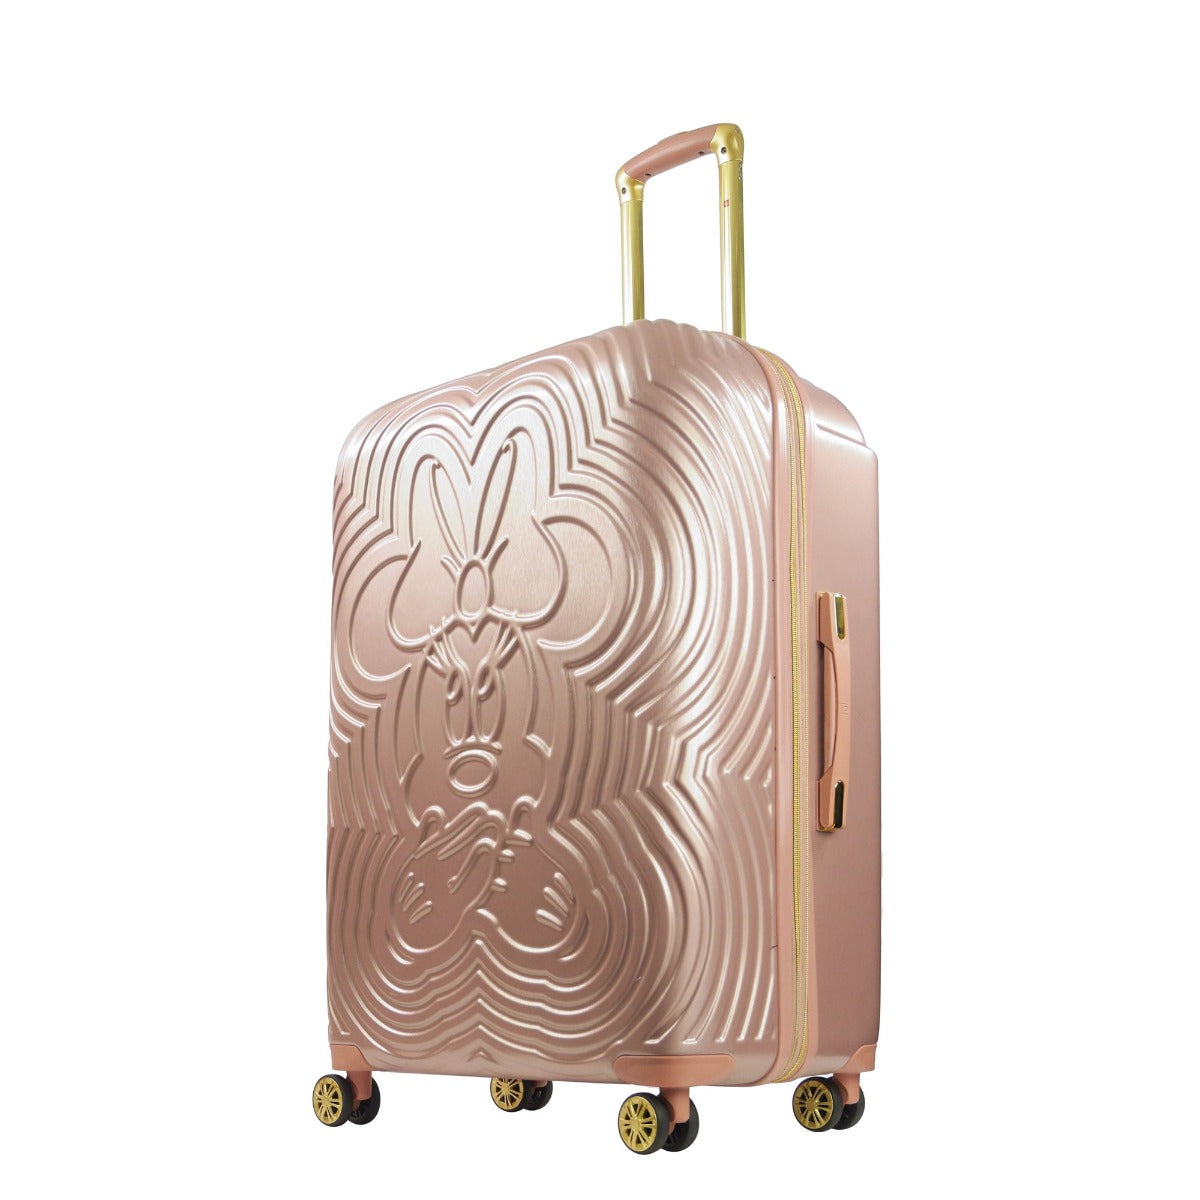 Disney Ful Playful Minnie Mouse 30.5" expandable hard sided spinner suitcase luggage check in rose gold